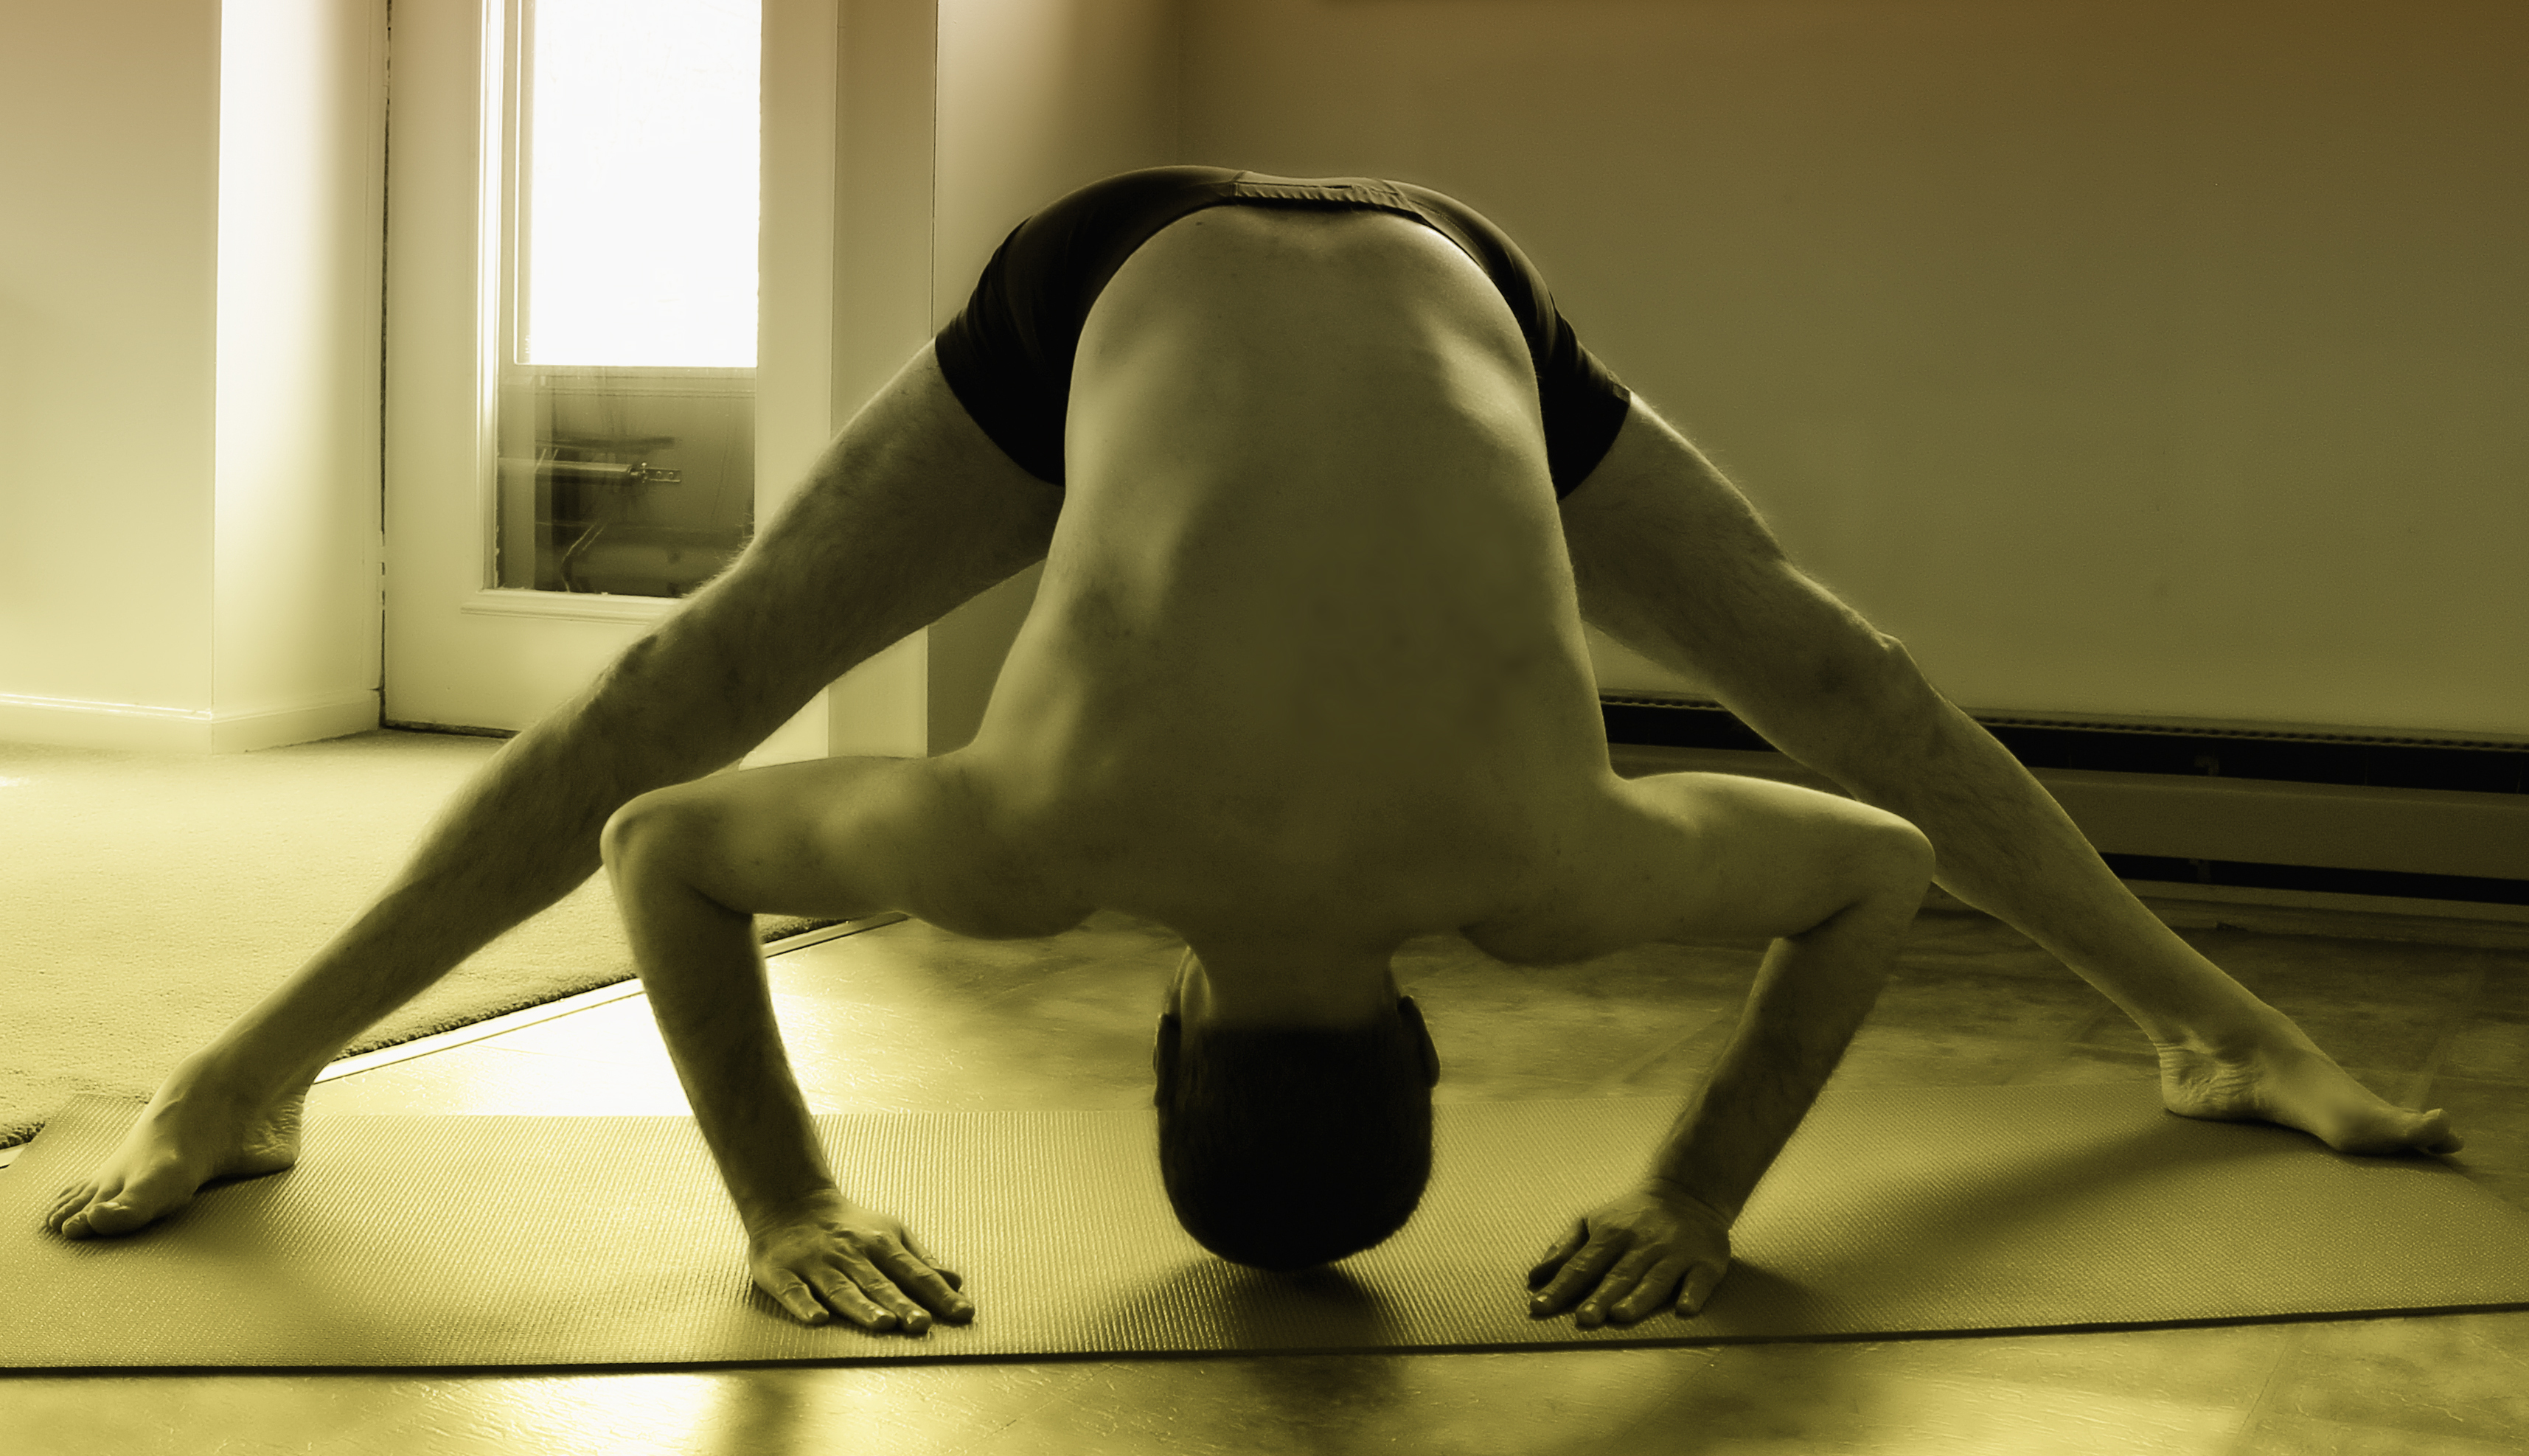 What is Toe Stand? - Definition from Yogapedia